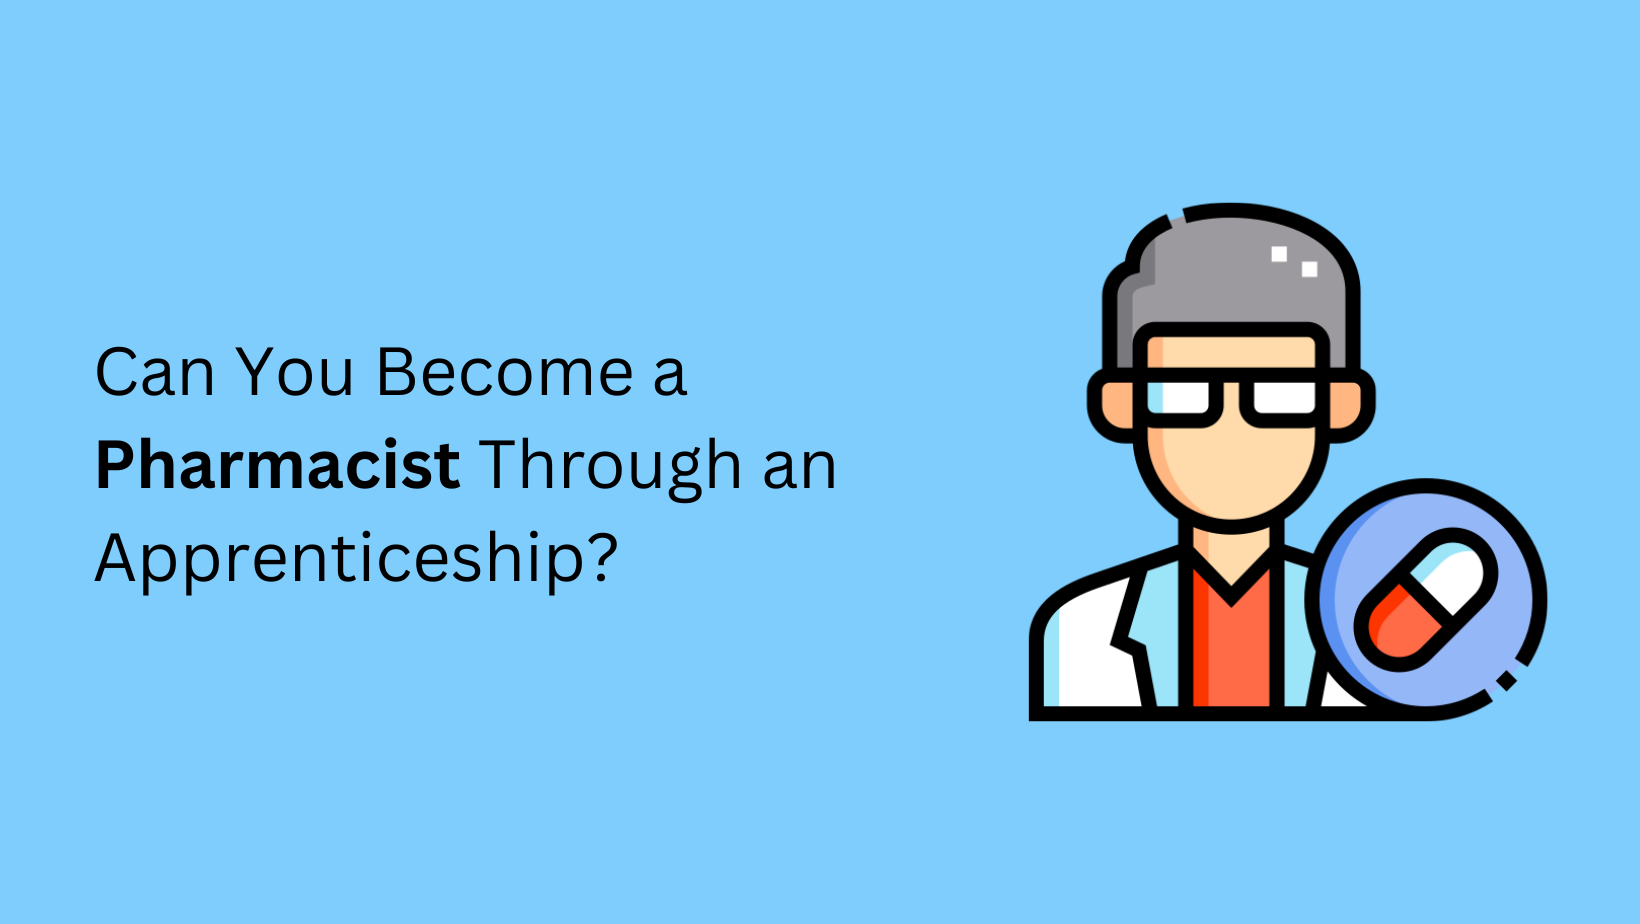 Can You Become a Pharmacist Through an Apprenticeship